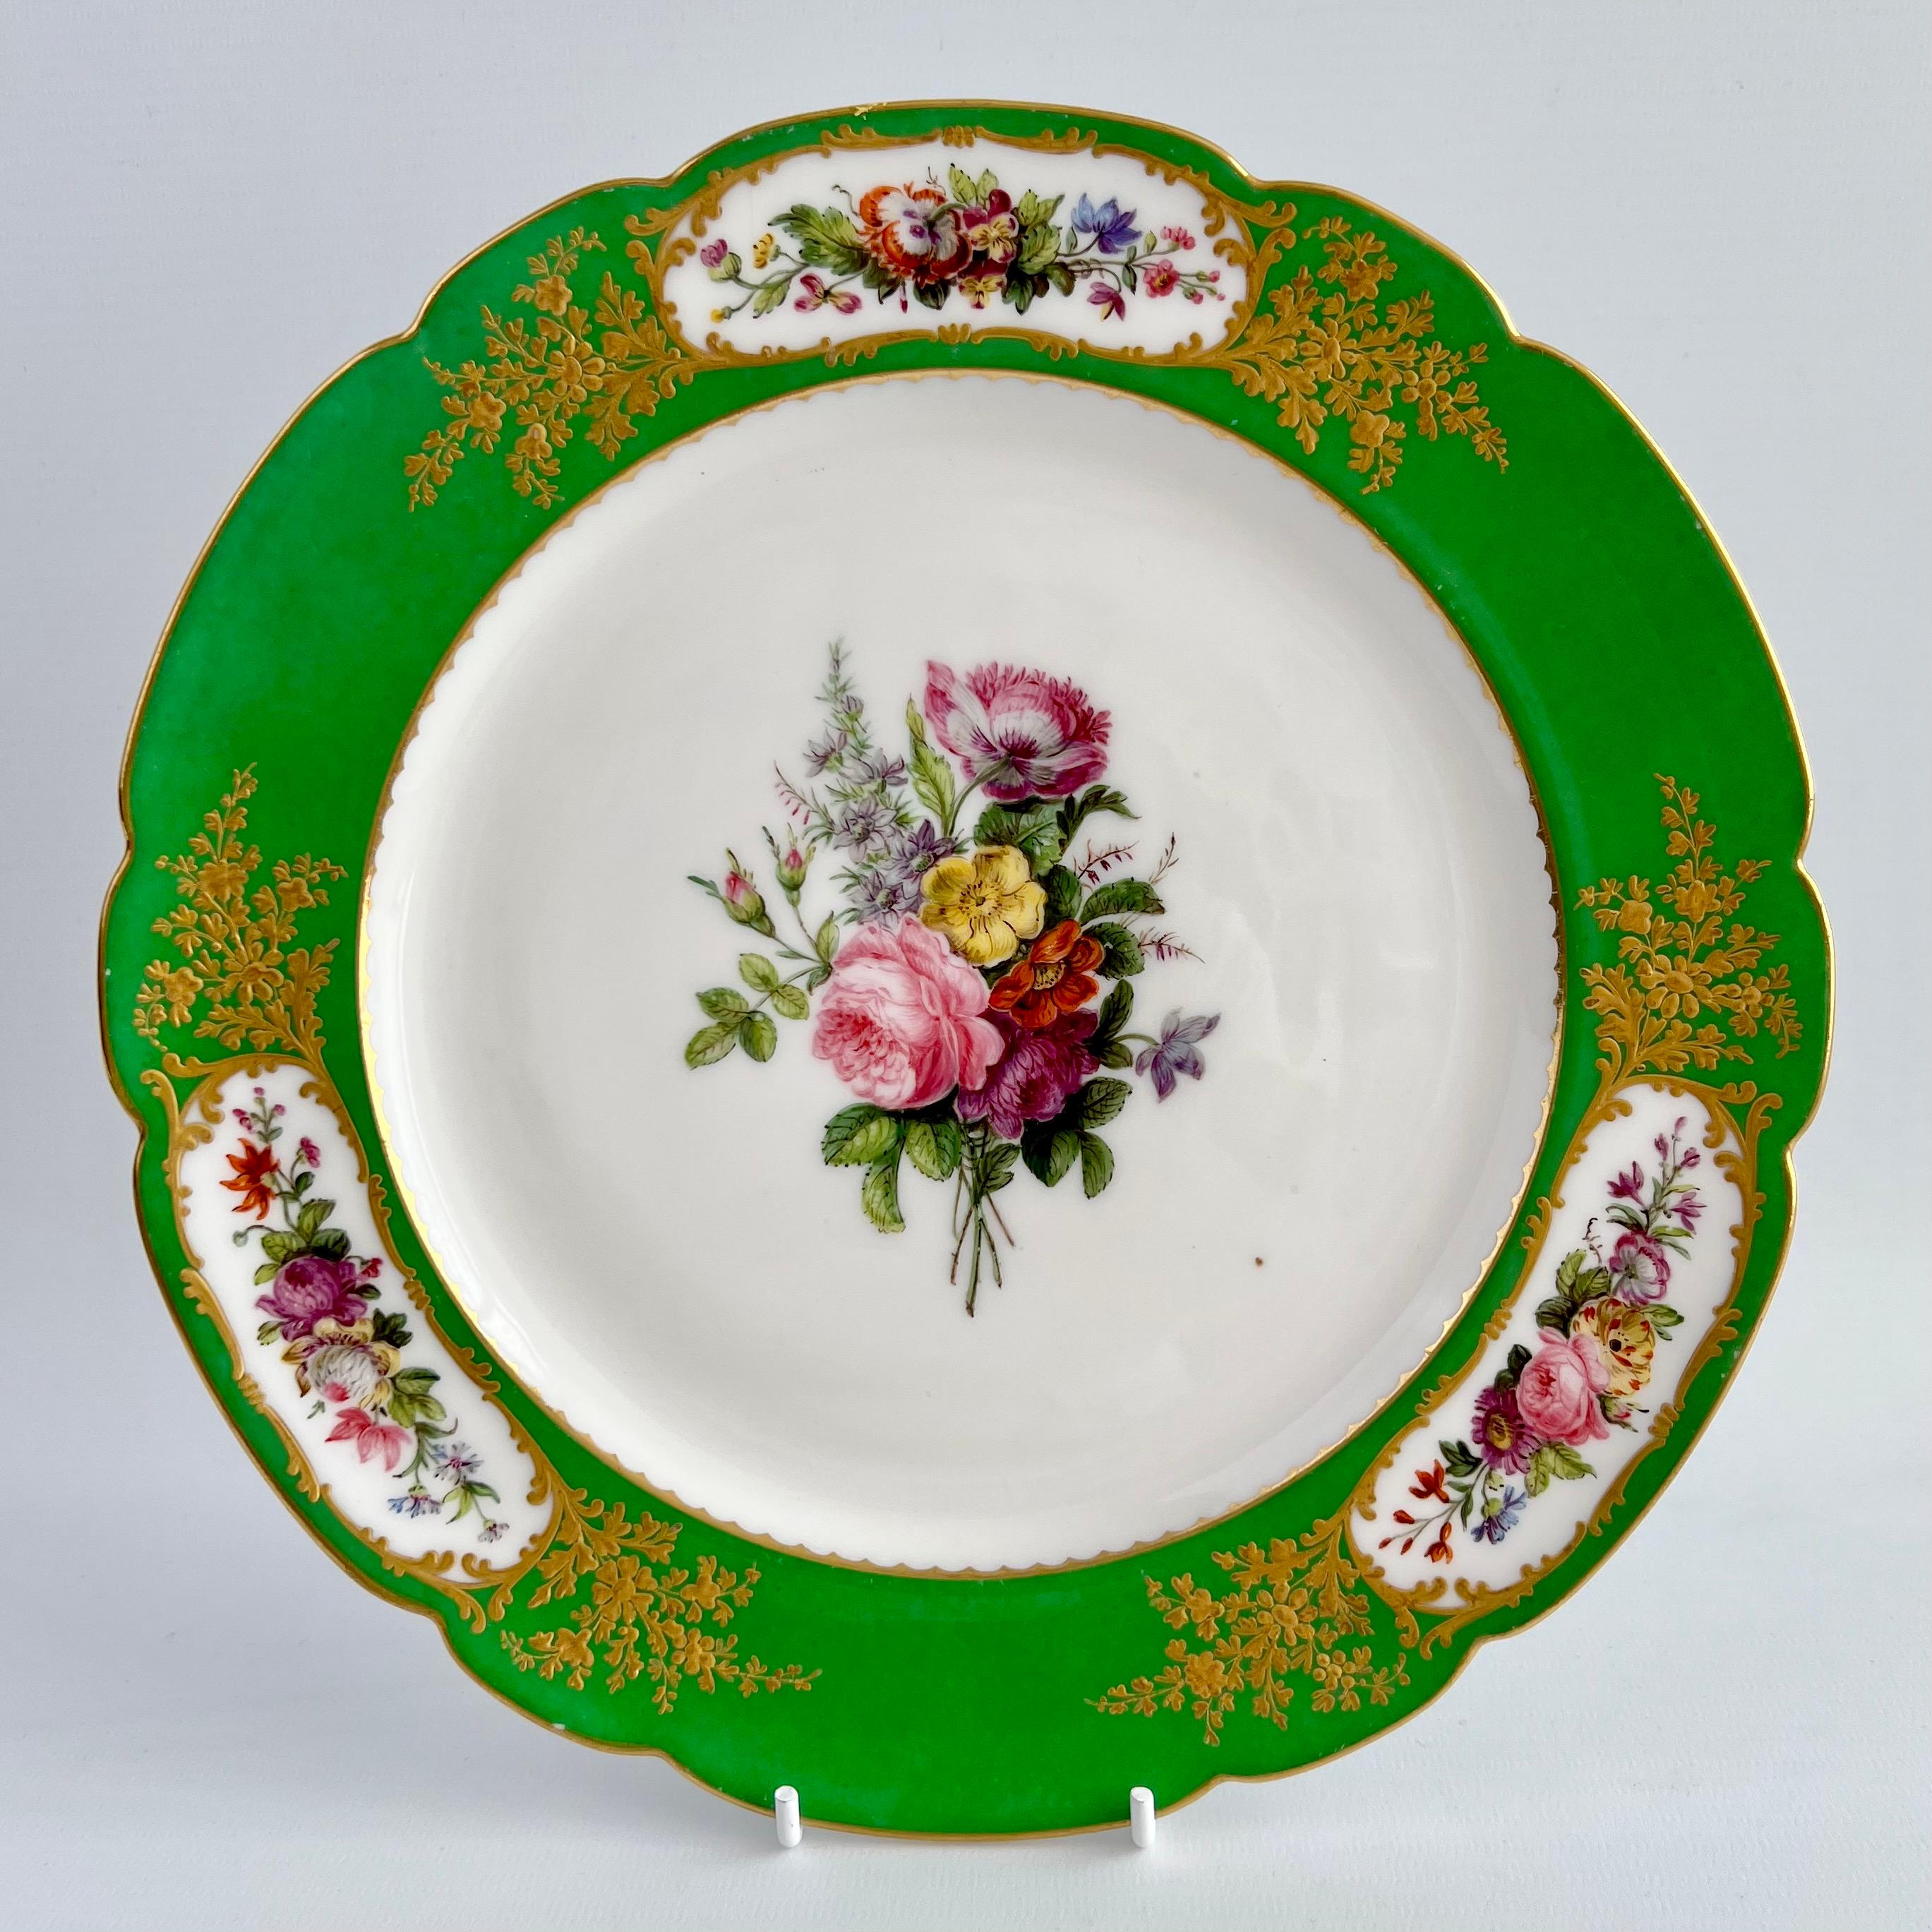 Vieux Paris Feuillet Set of 6 Plates, French Green, Gilt and Flowers, 1817-1834 2